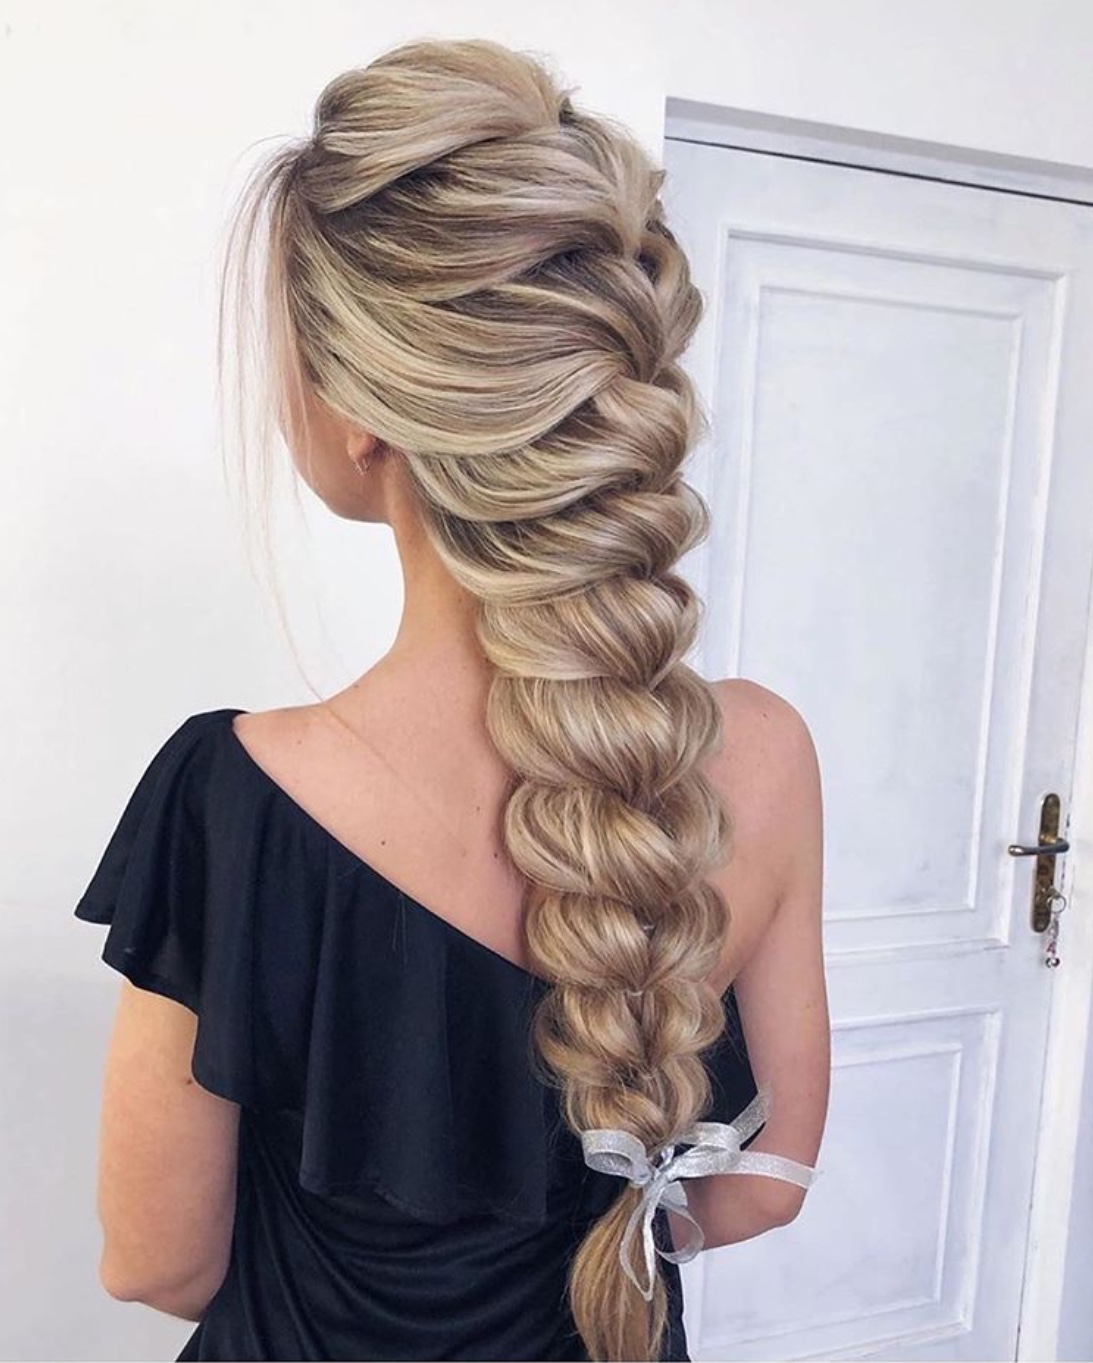 14 Easy Braided Hairstyles For Long Hair - The Glossychic